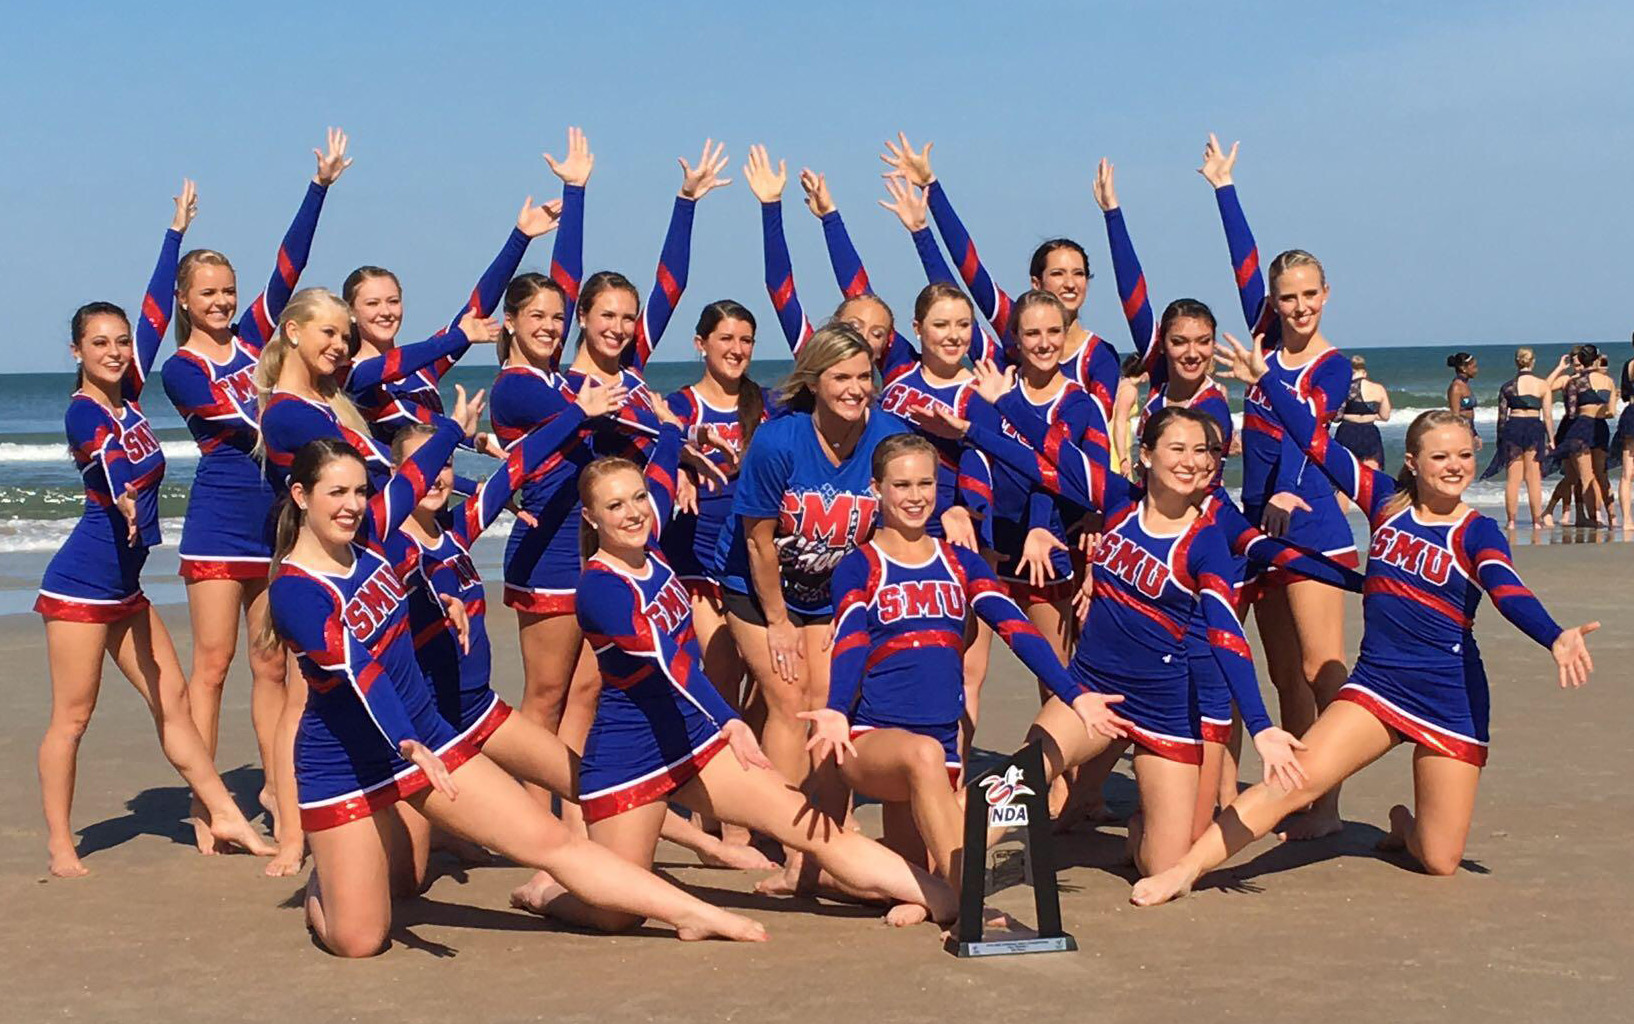 Three cheers for national champs: SMU Cheer takes top NCA honors - SMU